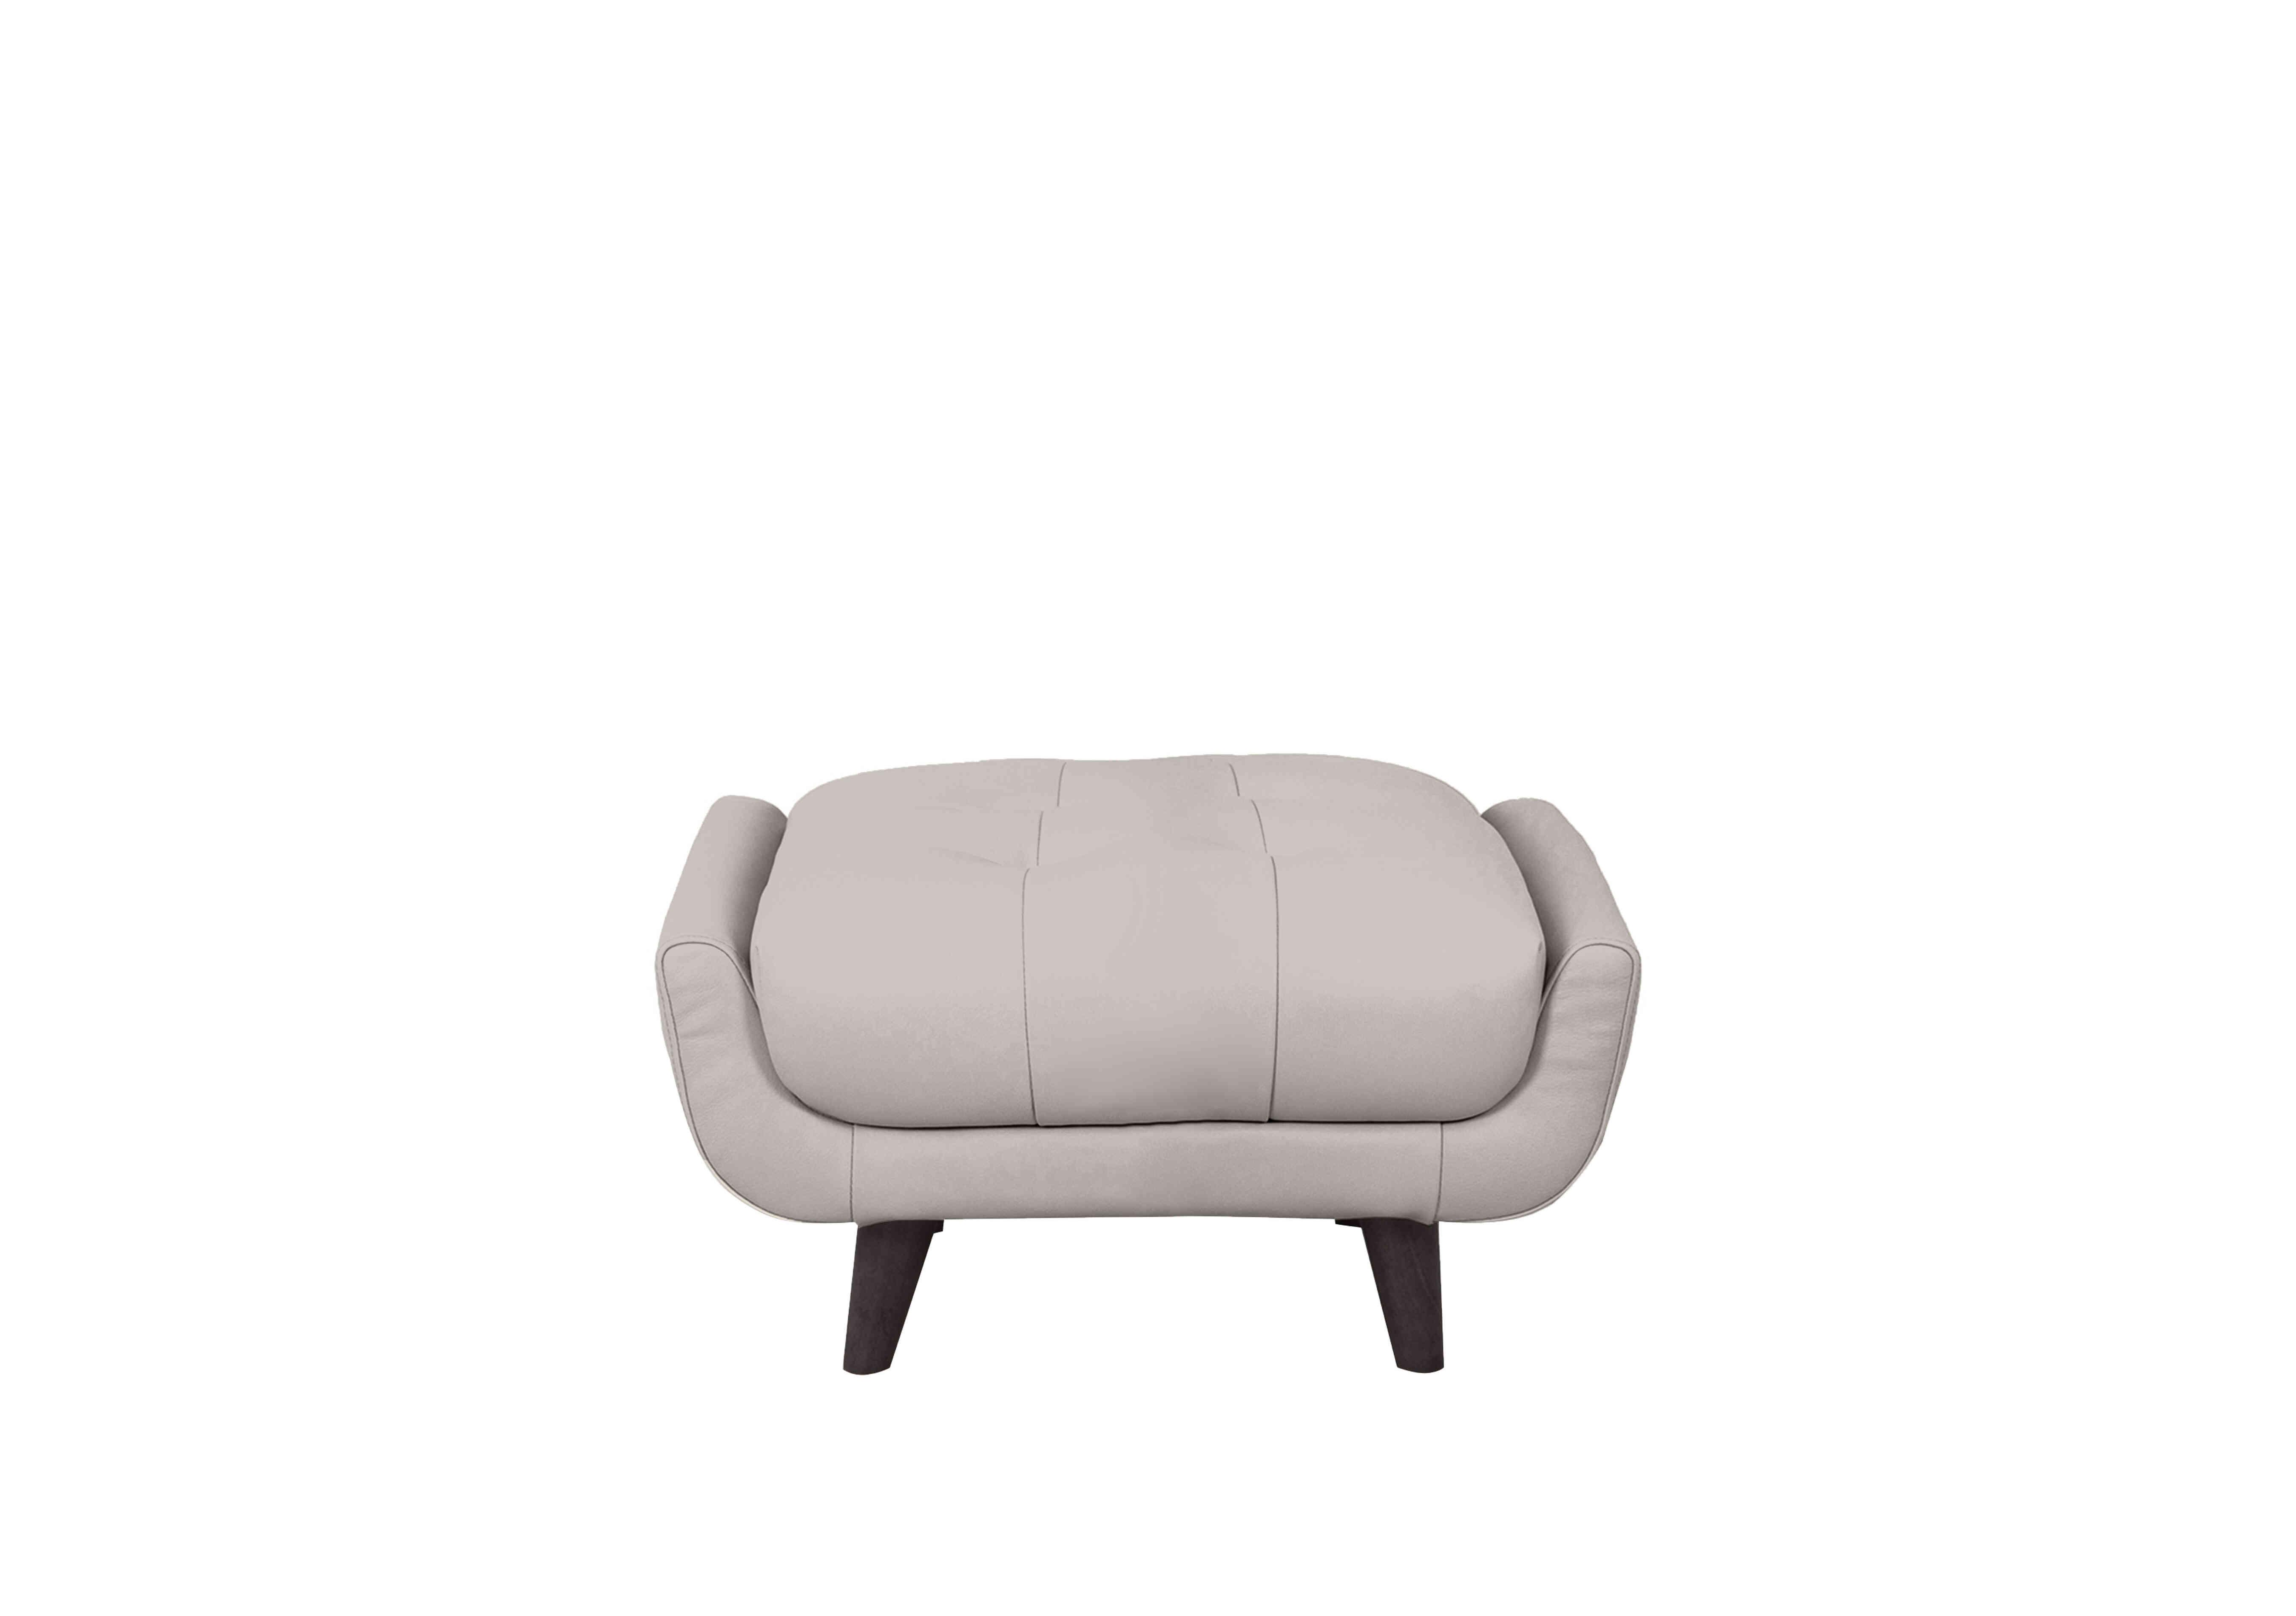 Rene Small Leather Footstool in Florida Lead Grey on Furniture Village